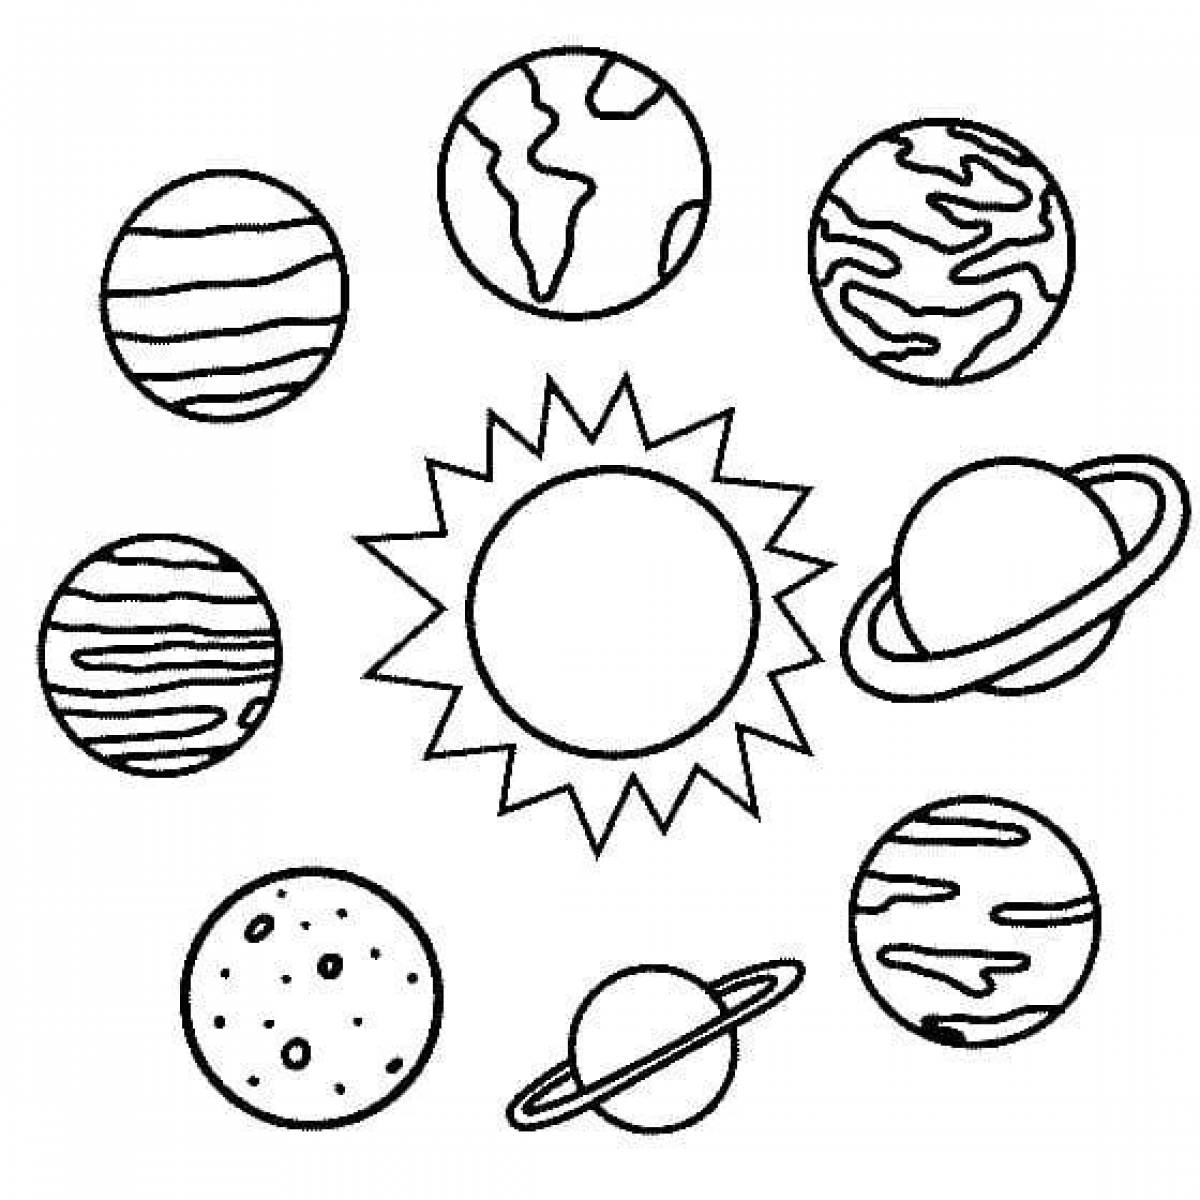 Planets of the solar system for kids #5